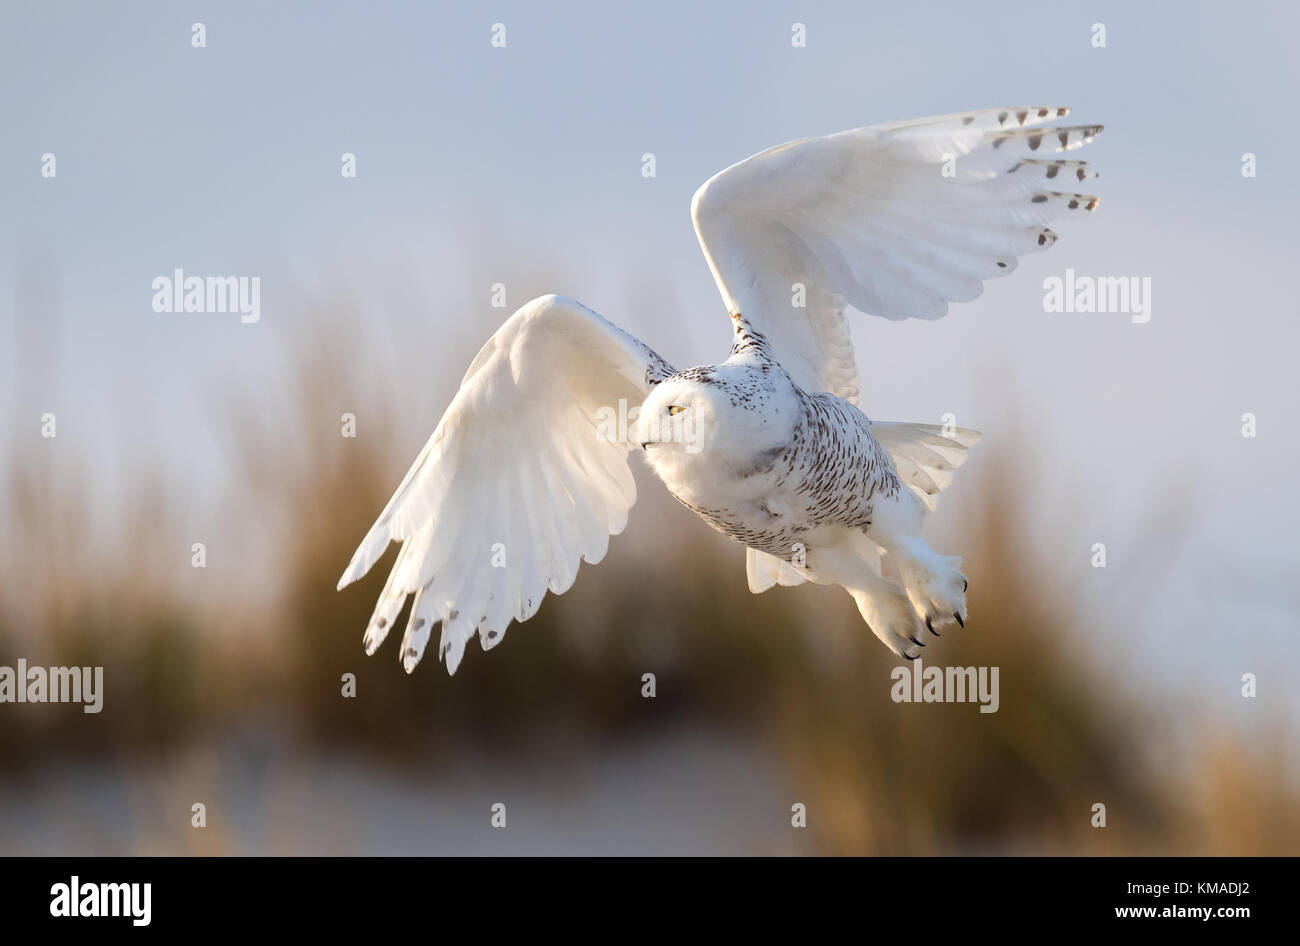 A Snowy Owl at the Jersey Shore Stock Photo